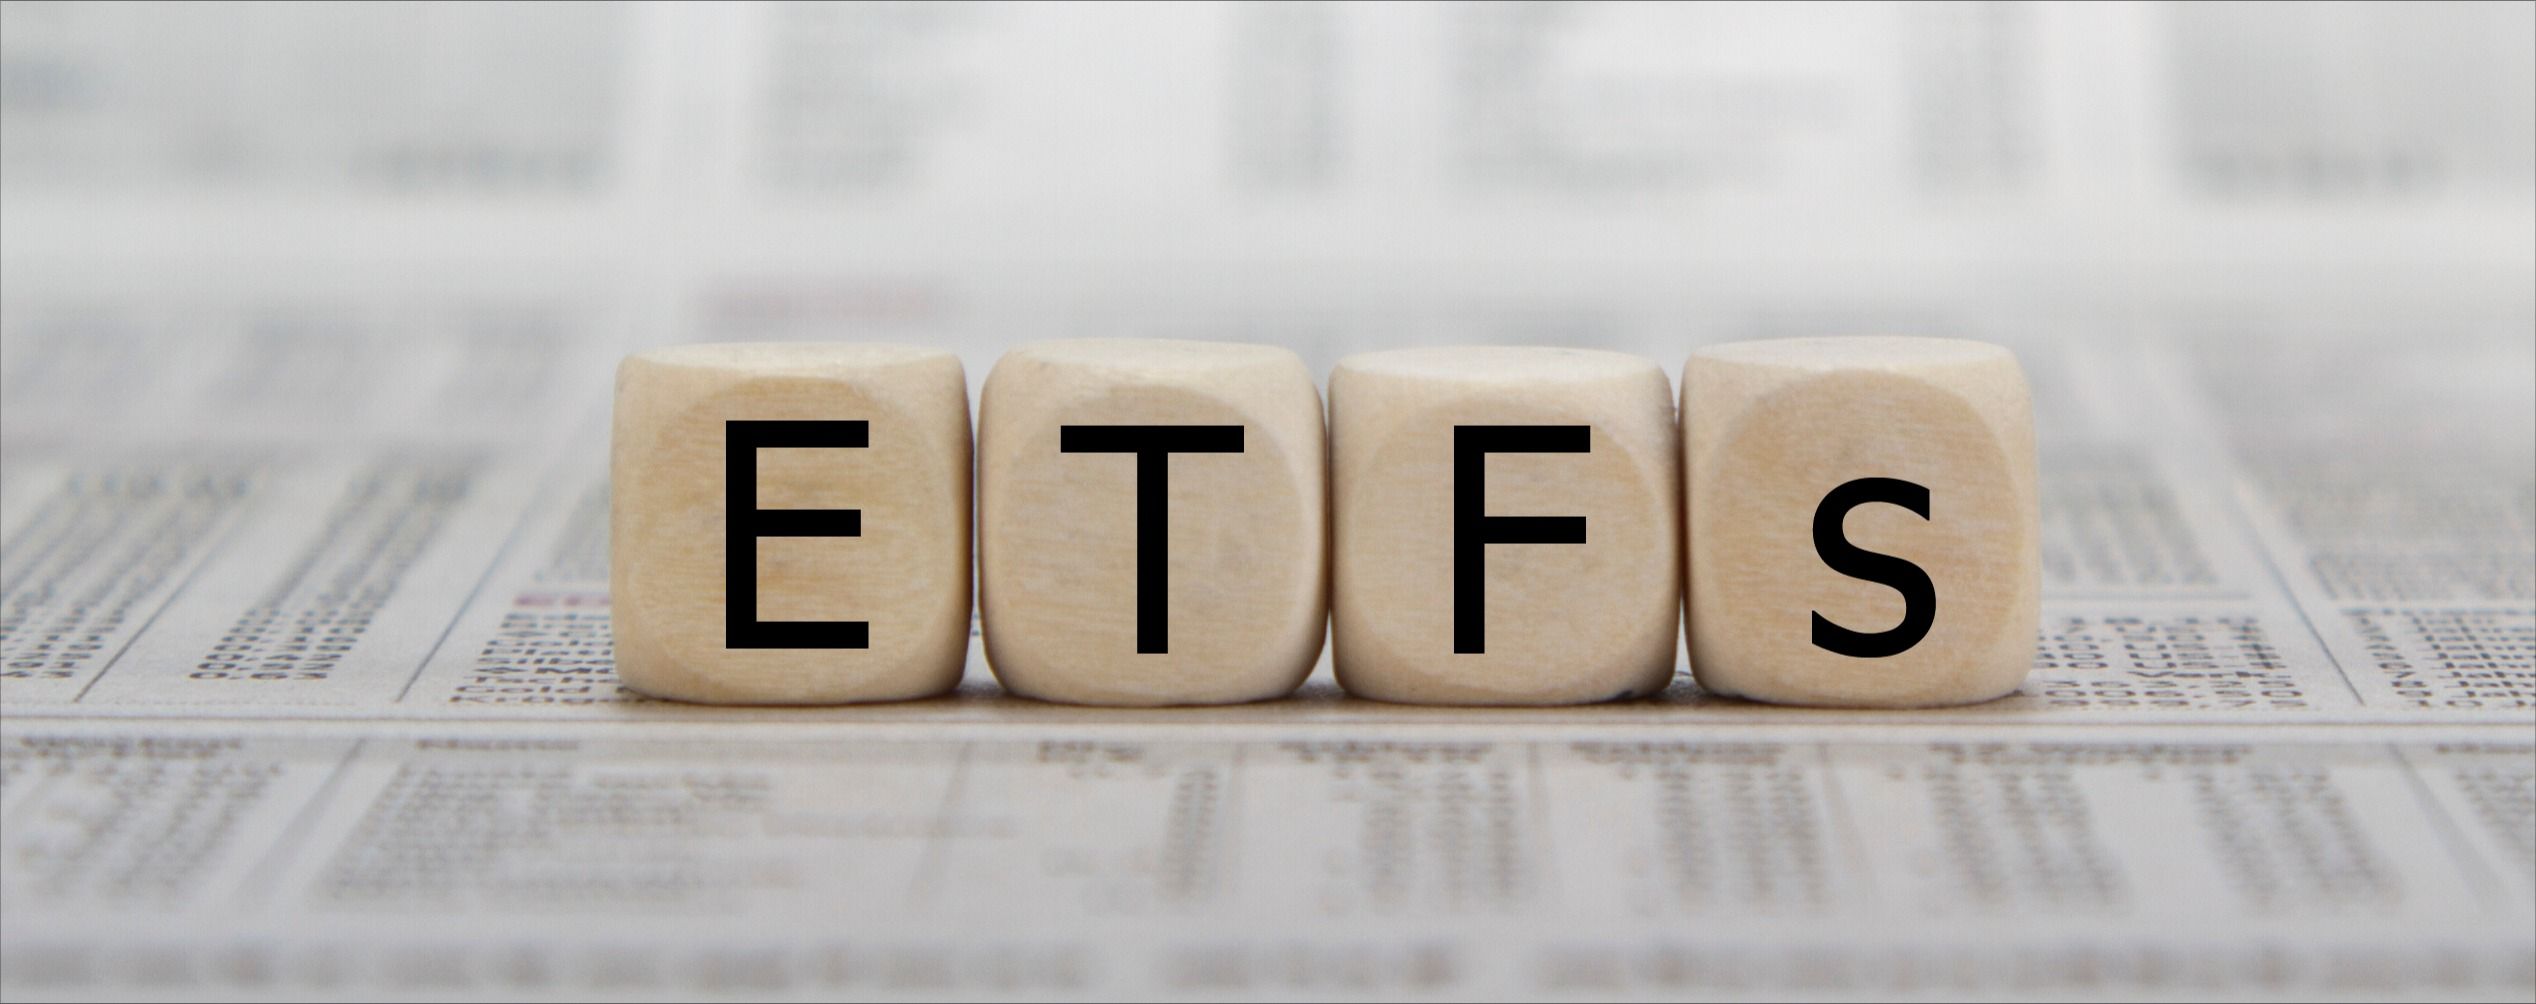 ETF exchange trades funds word on a blurred business newspaper